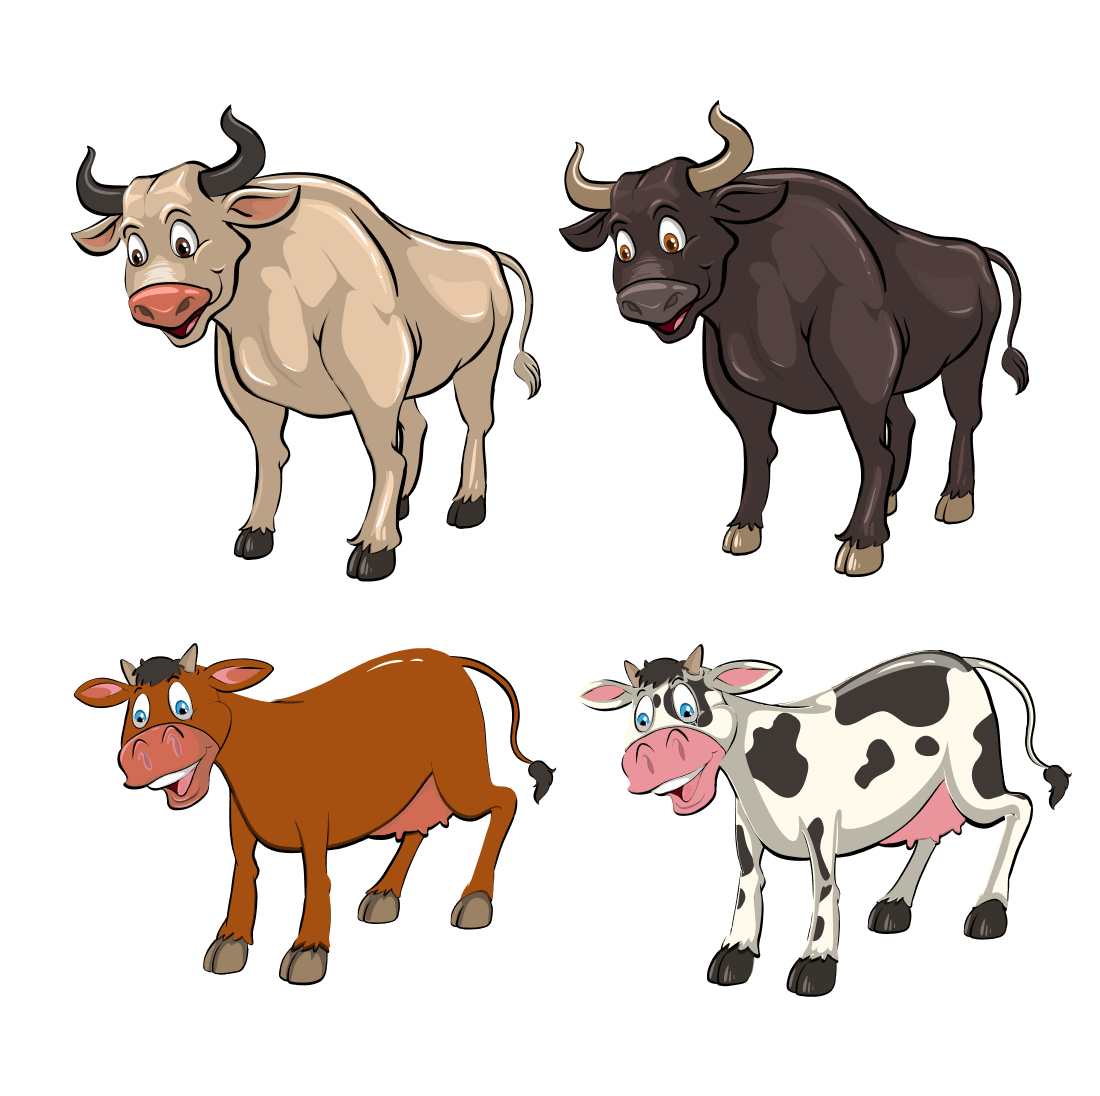 Multicolored young cows.